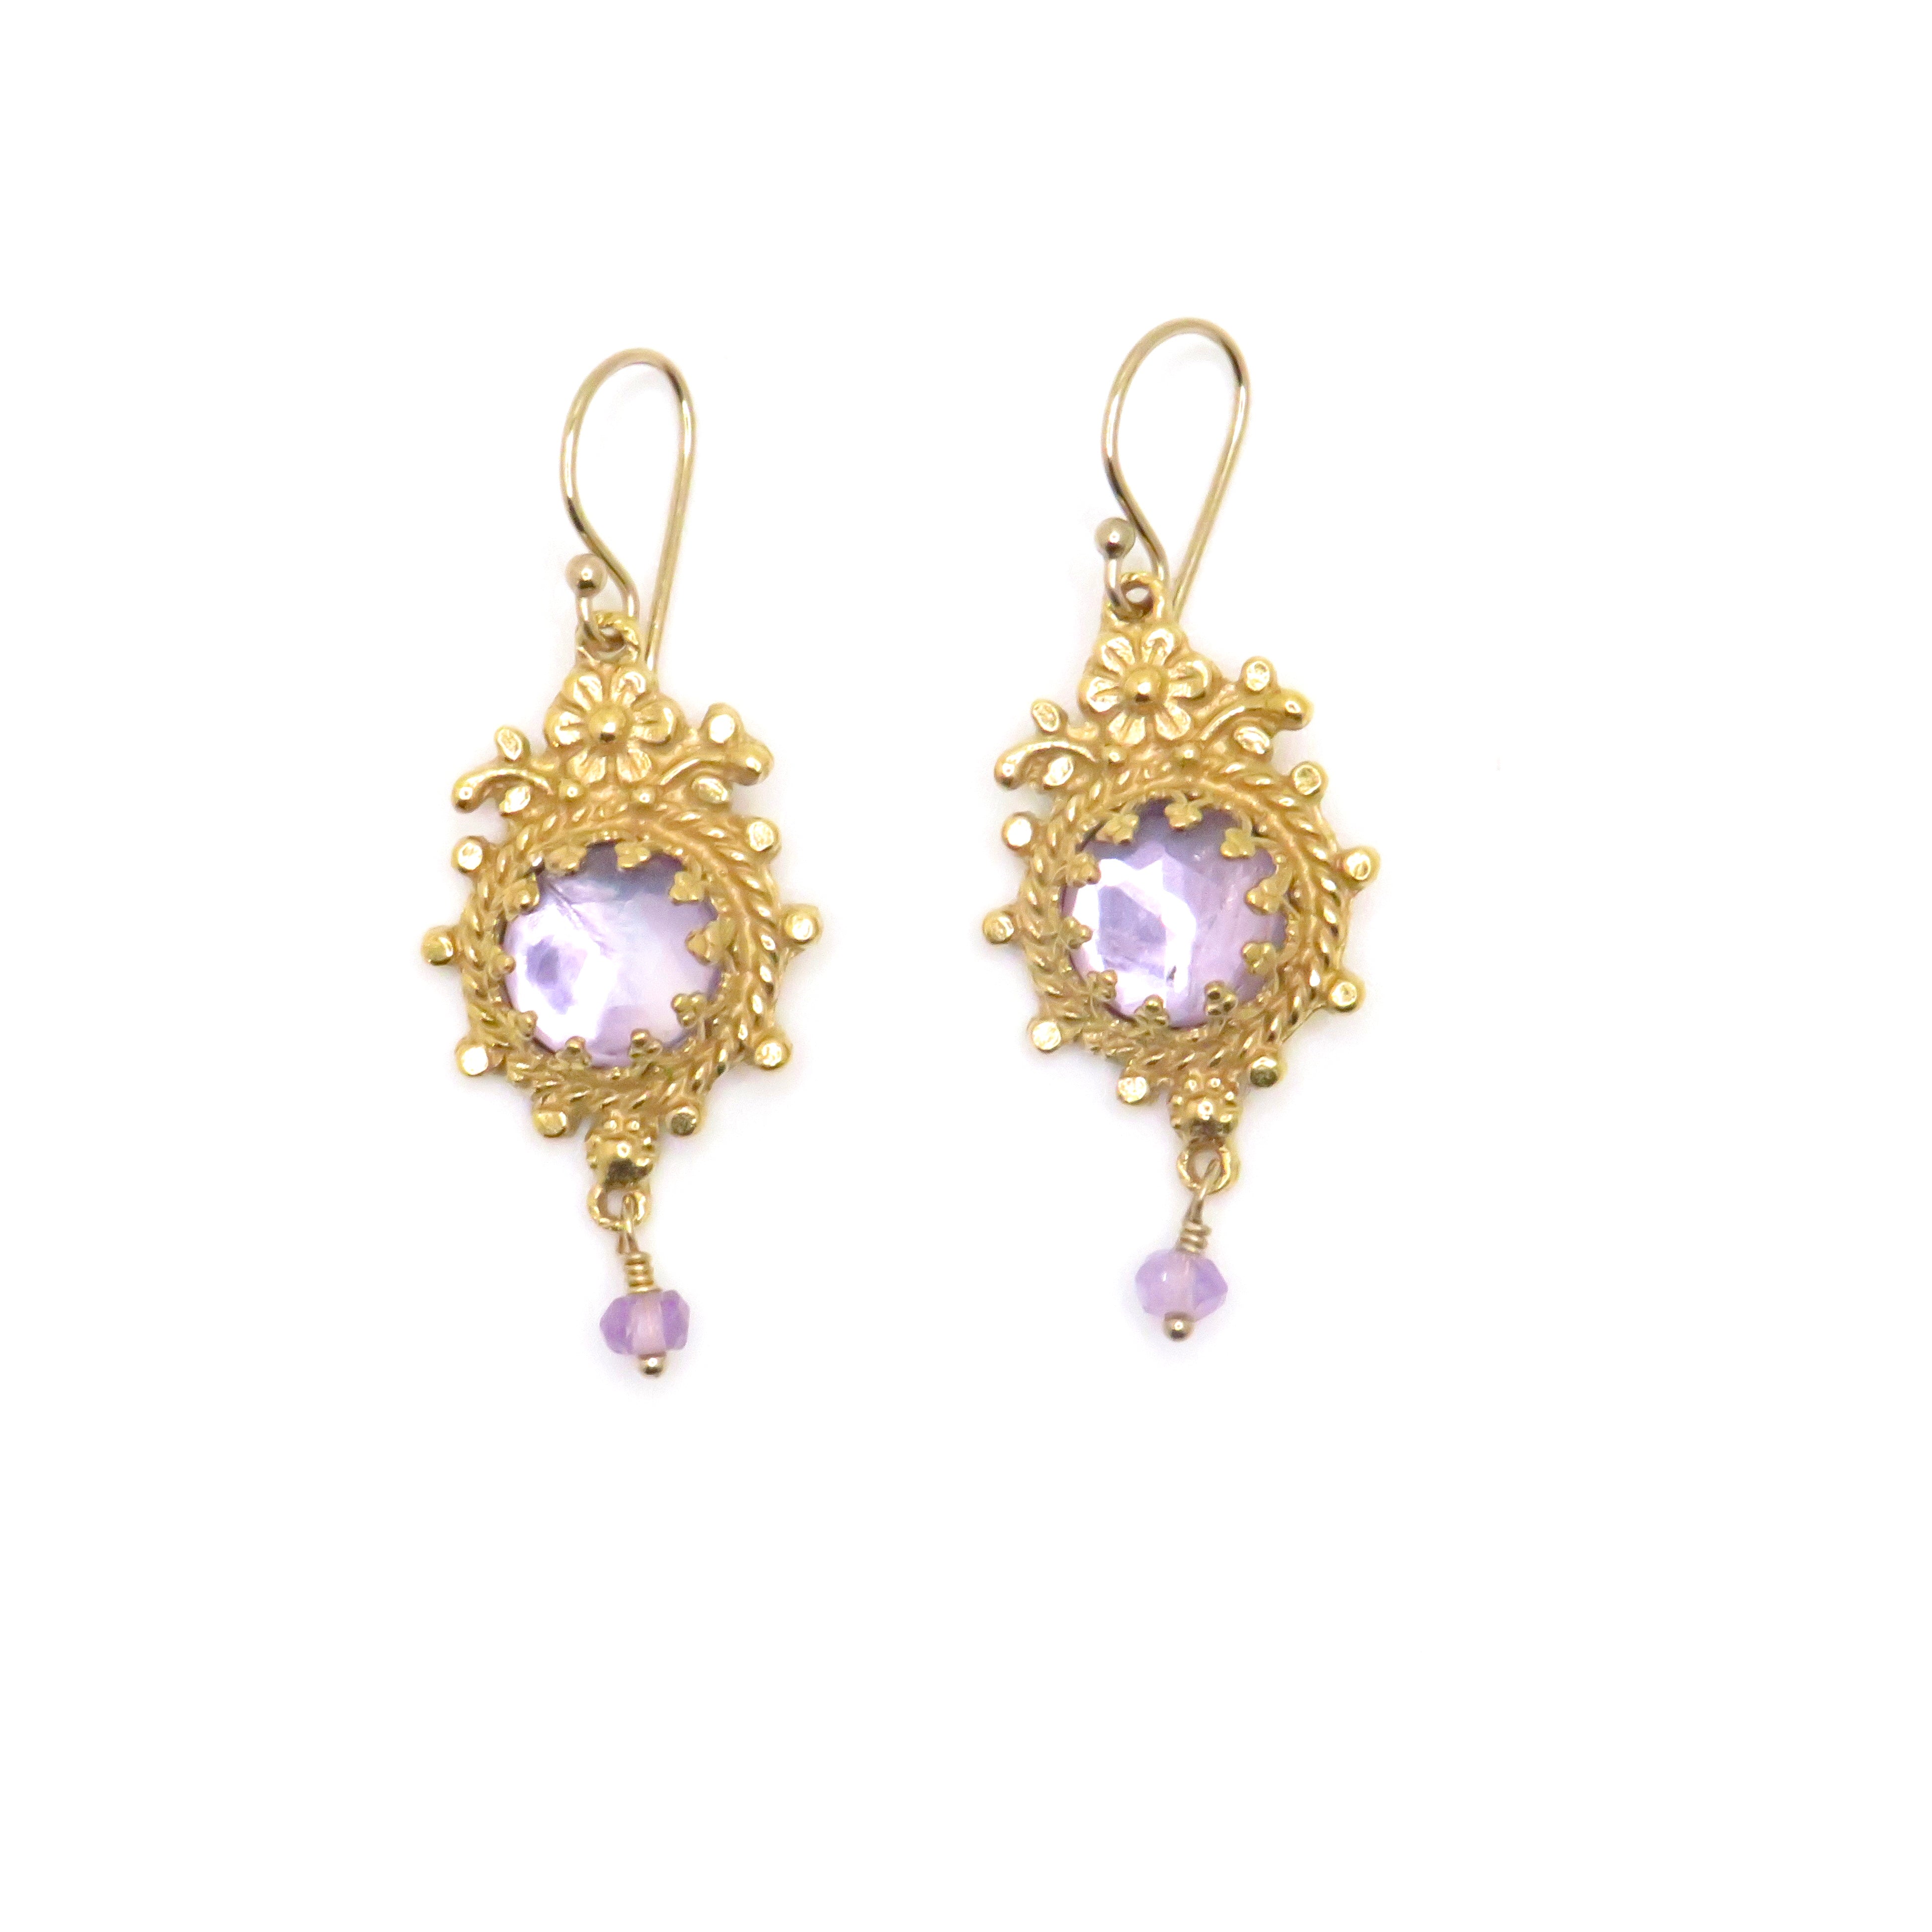 gold drop earrings with purple gemstone and bead